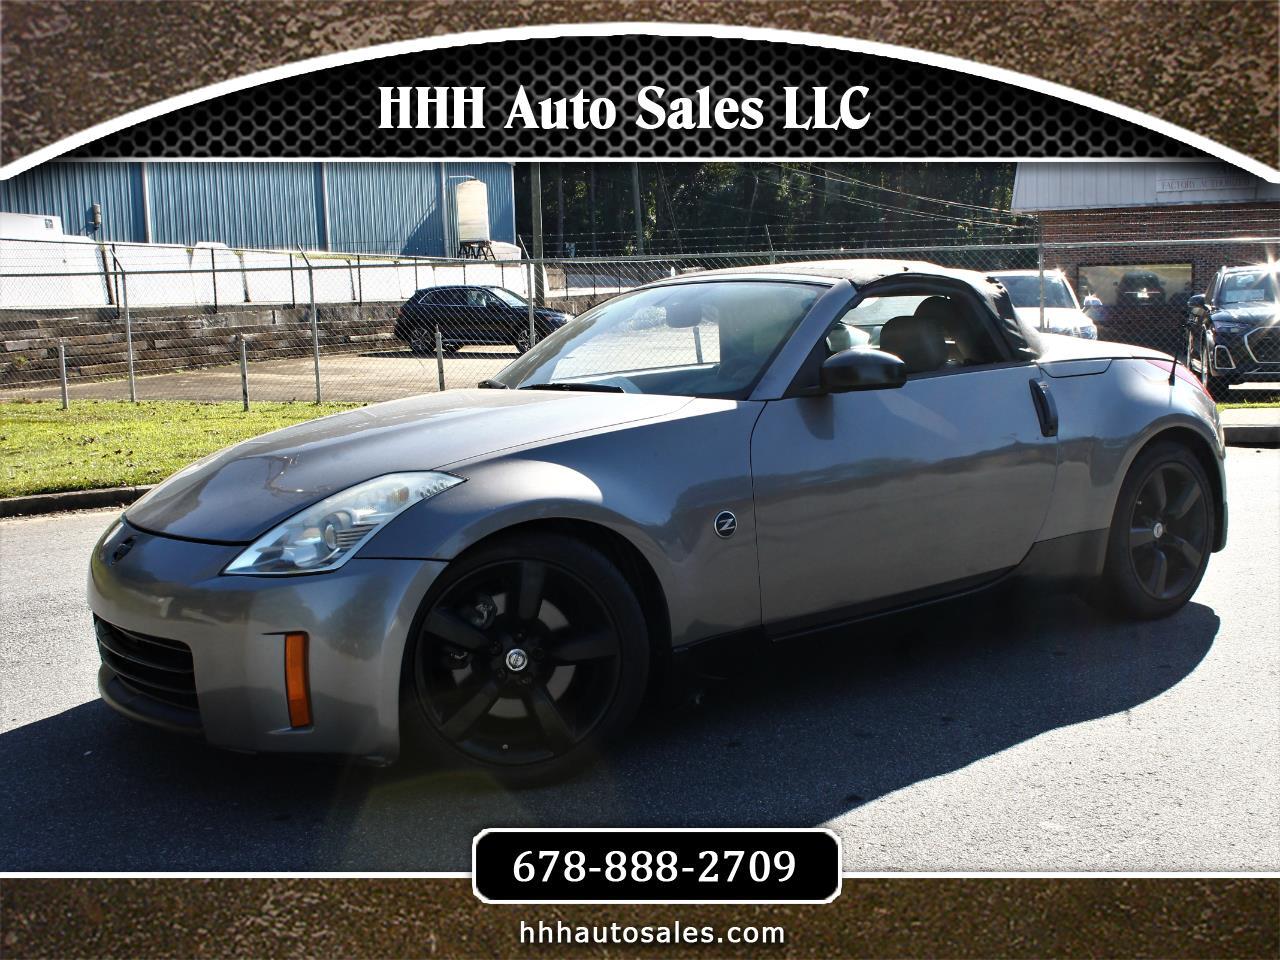 Nissan 350Z Enthusiast Roadster 2007